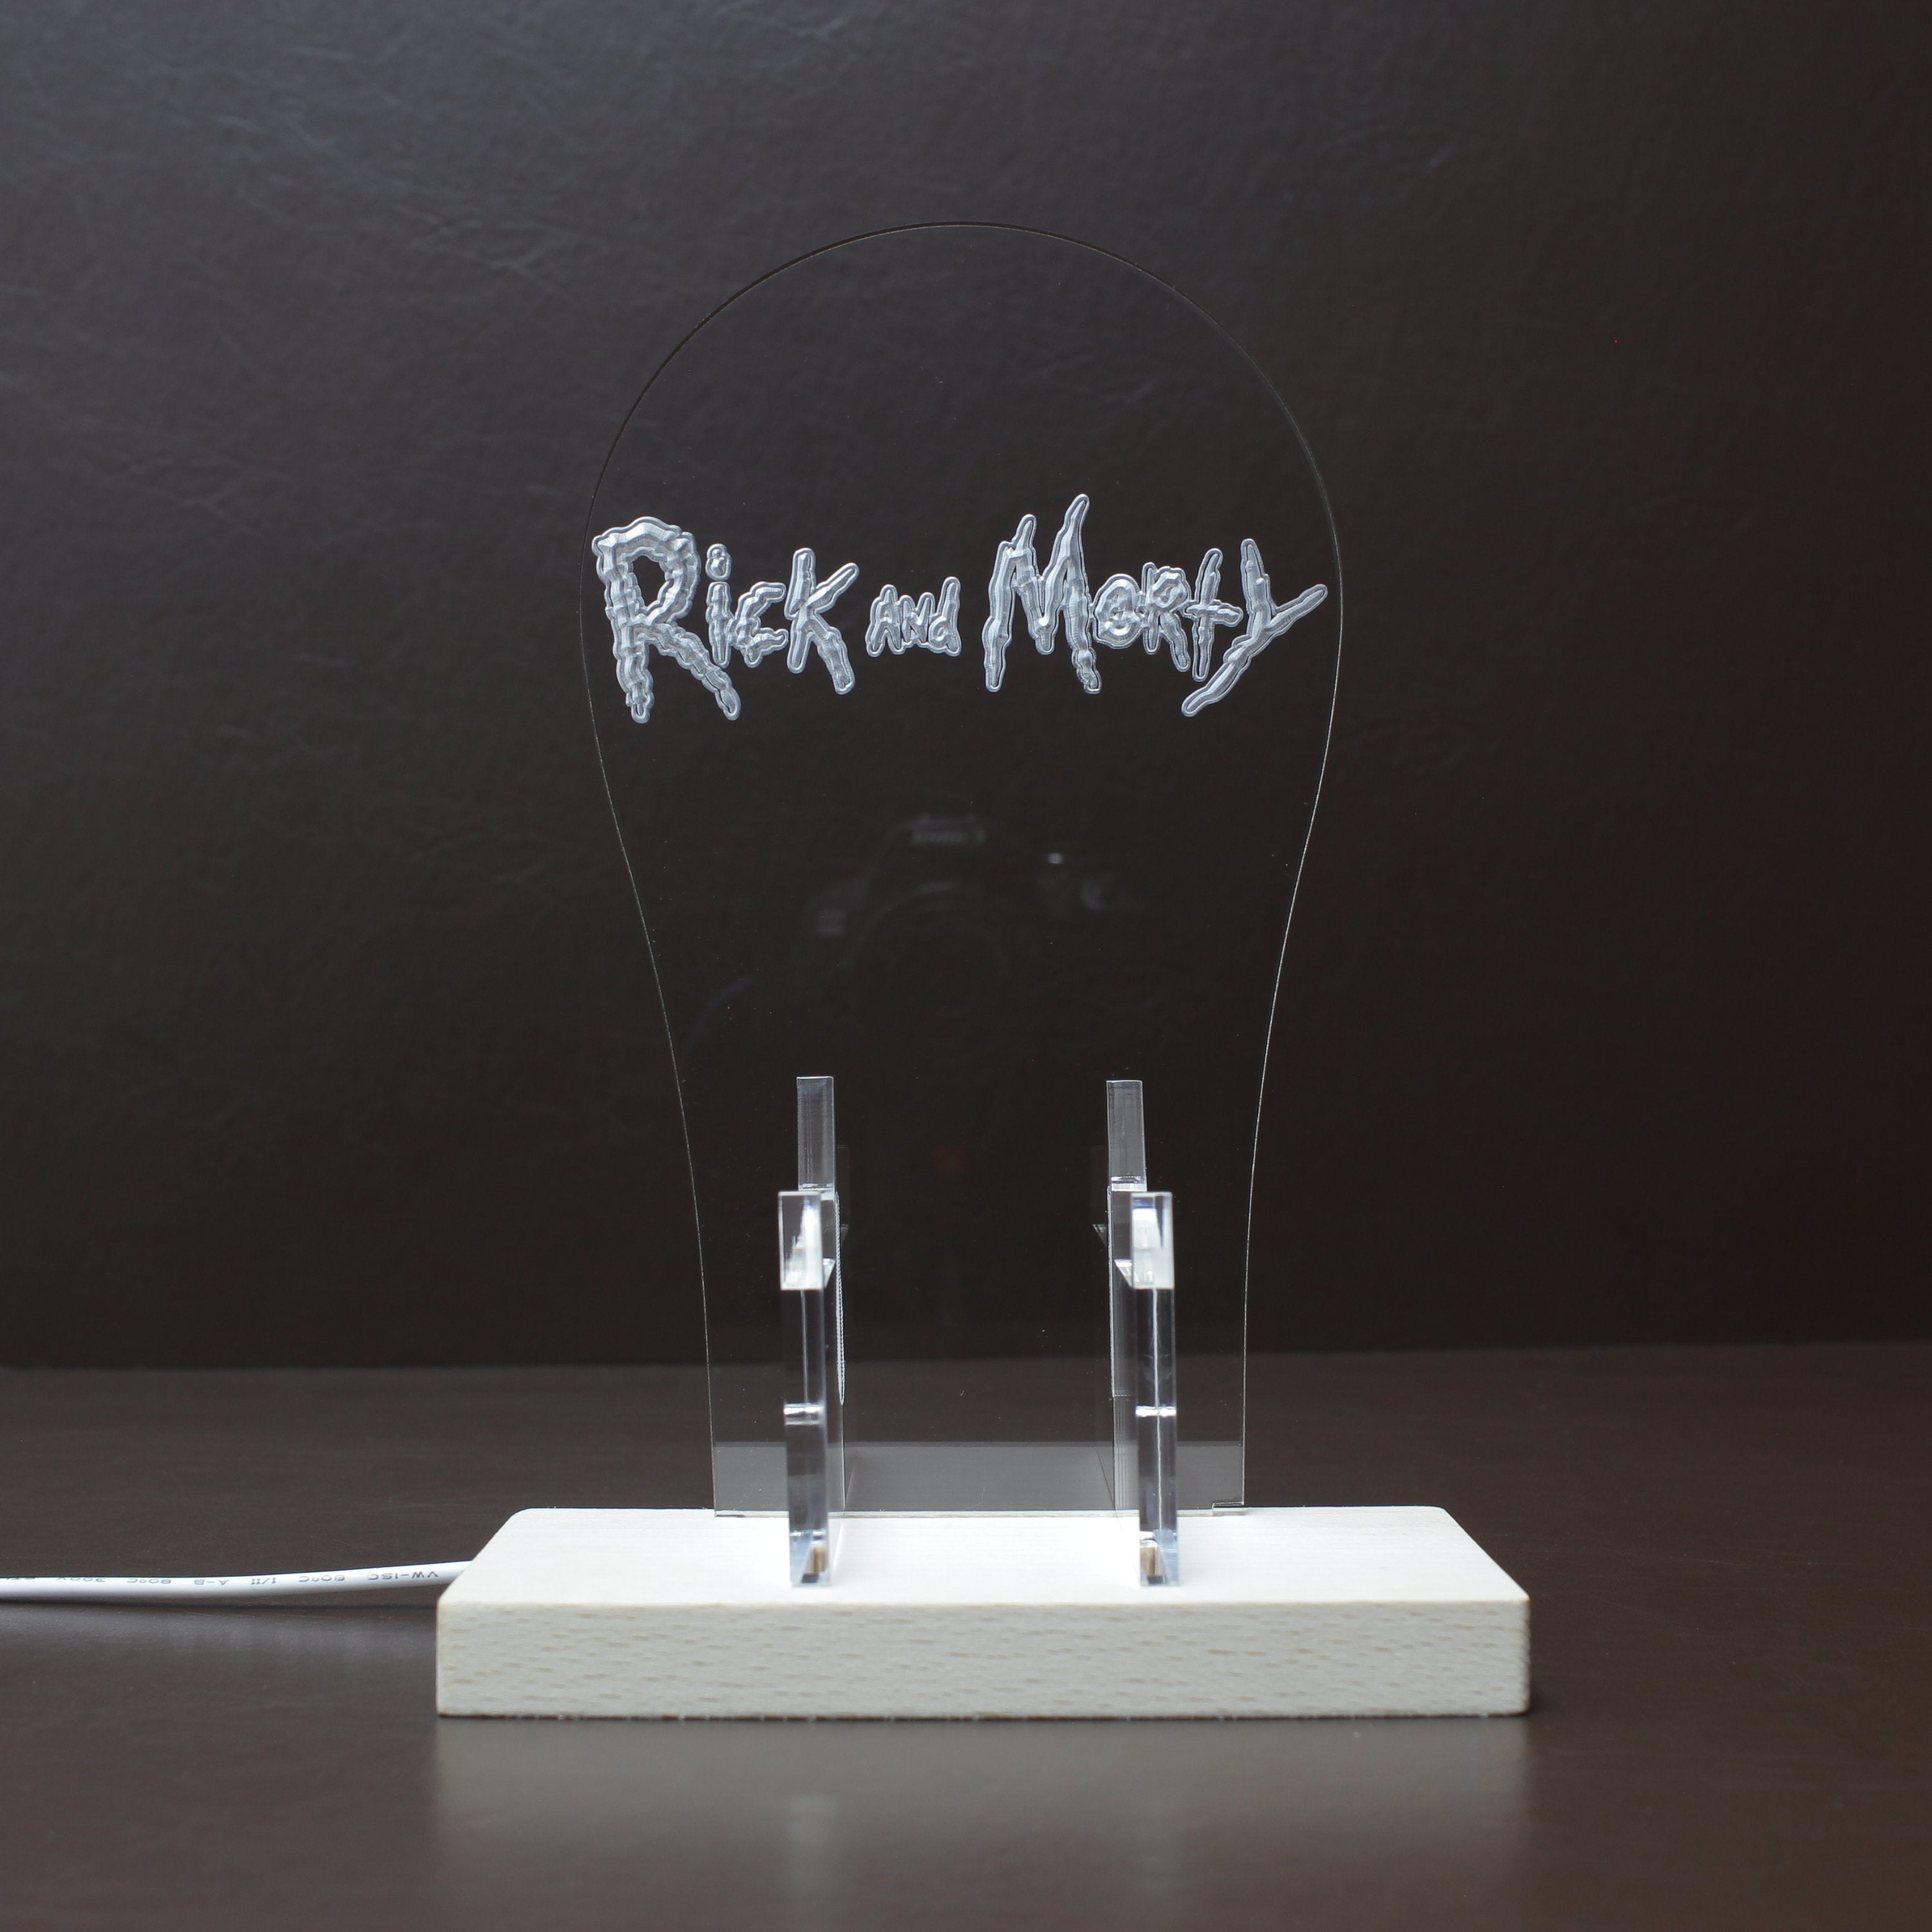 Rick And Morty LED Gaming Headset Controller Stand